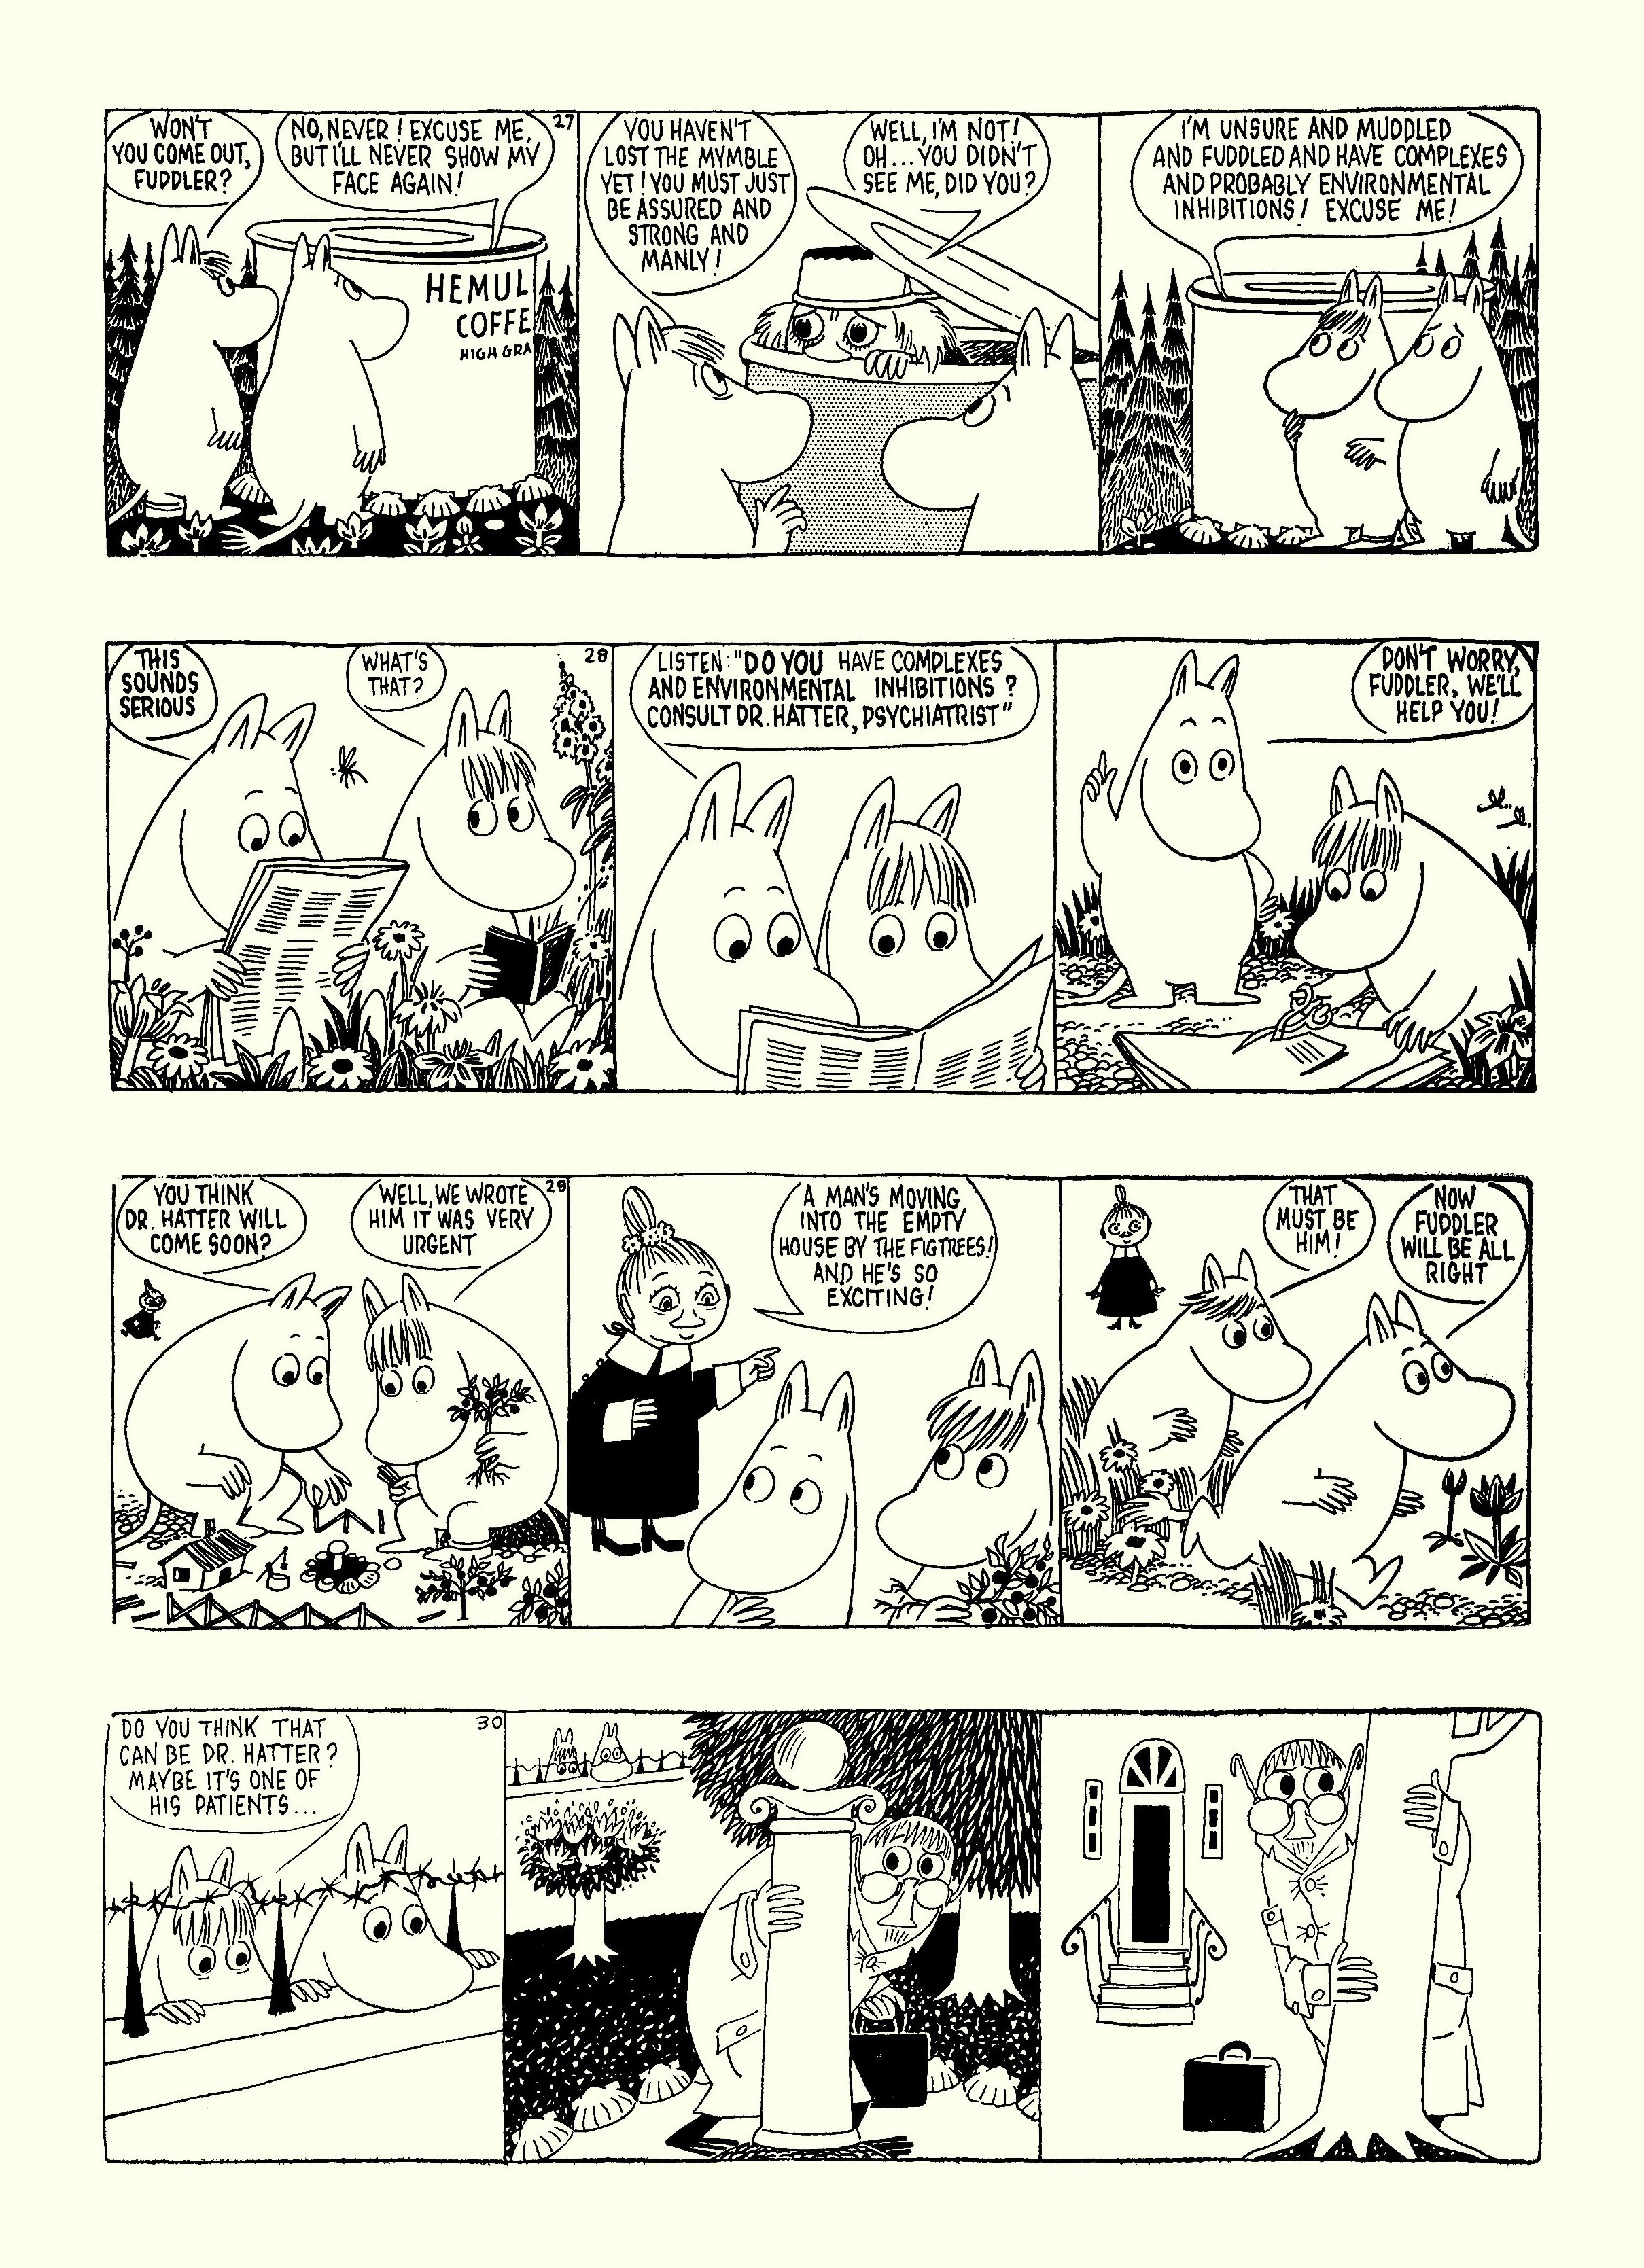 Read online Moomin: The Complete Tove Jansson Comic Strip comic -  Issue # TPB 5 - 64